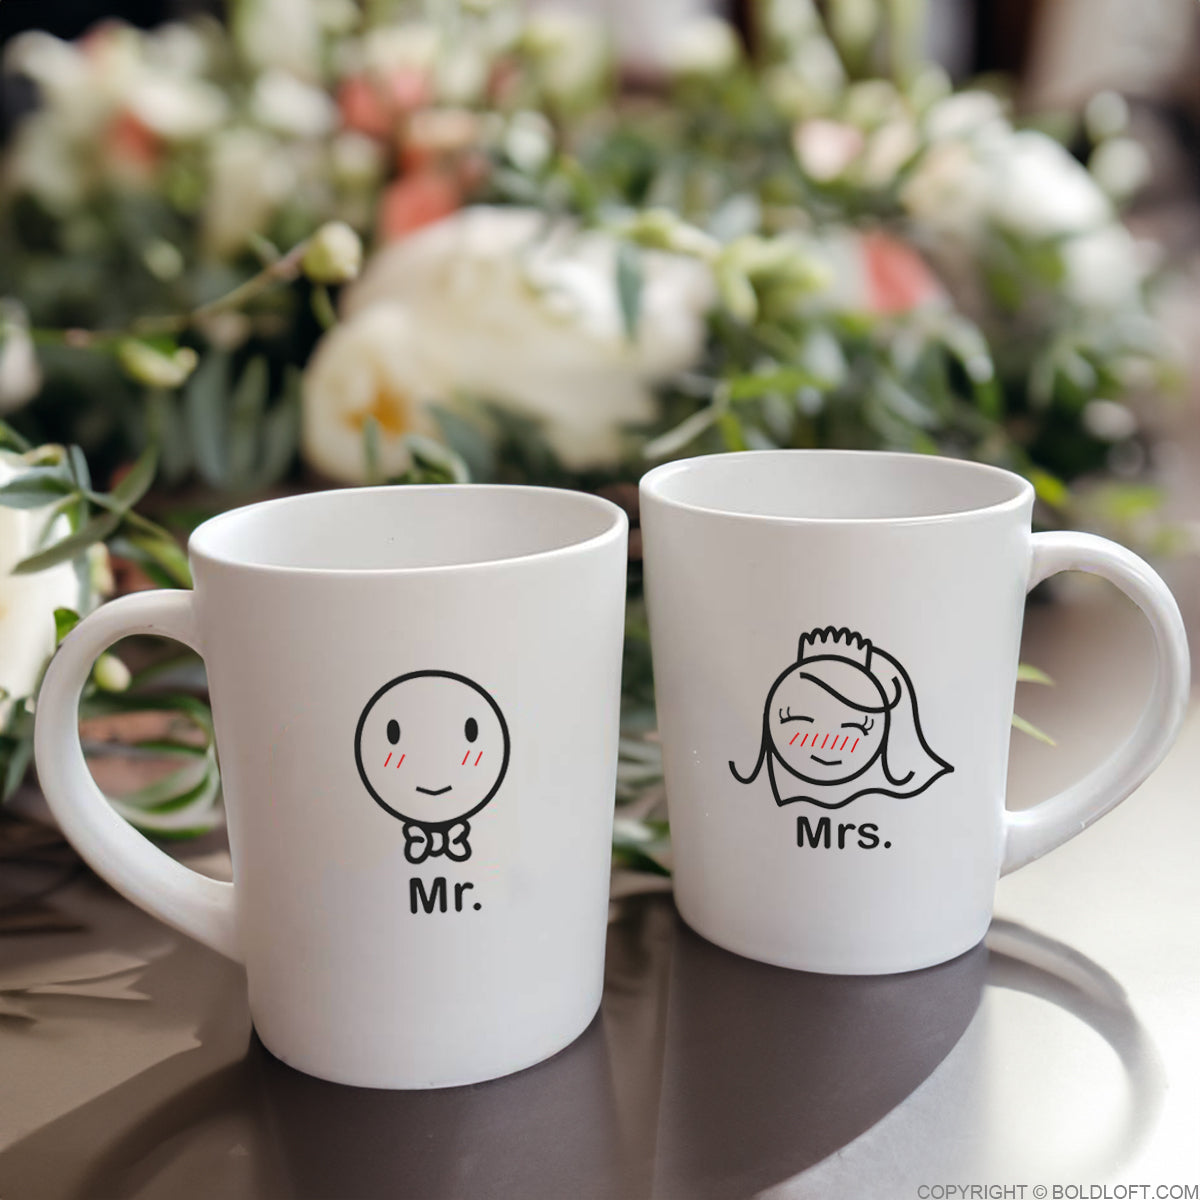 Adorable Mr Mrs wedding coffee mugs from BoldLoft showcasing  bride and groom characters. Perfect wedding and engagement gifts for him and her.